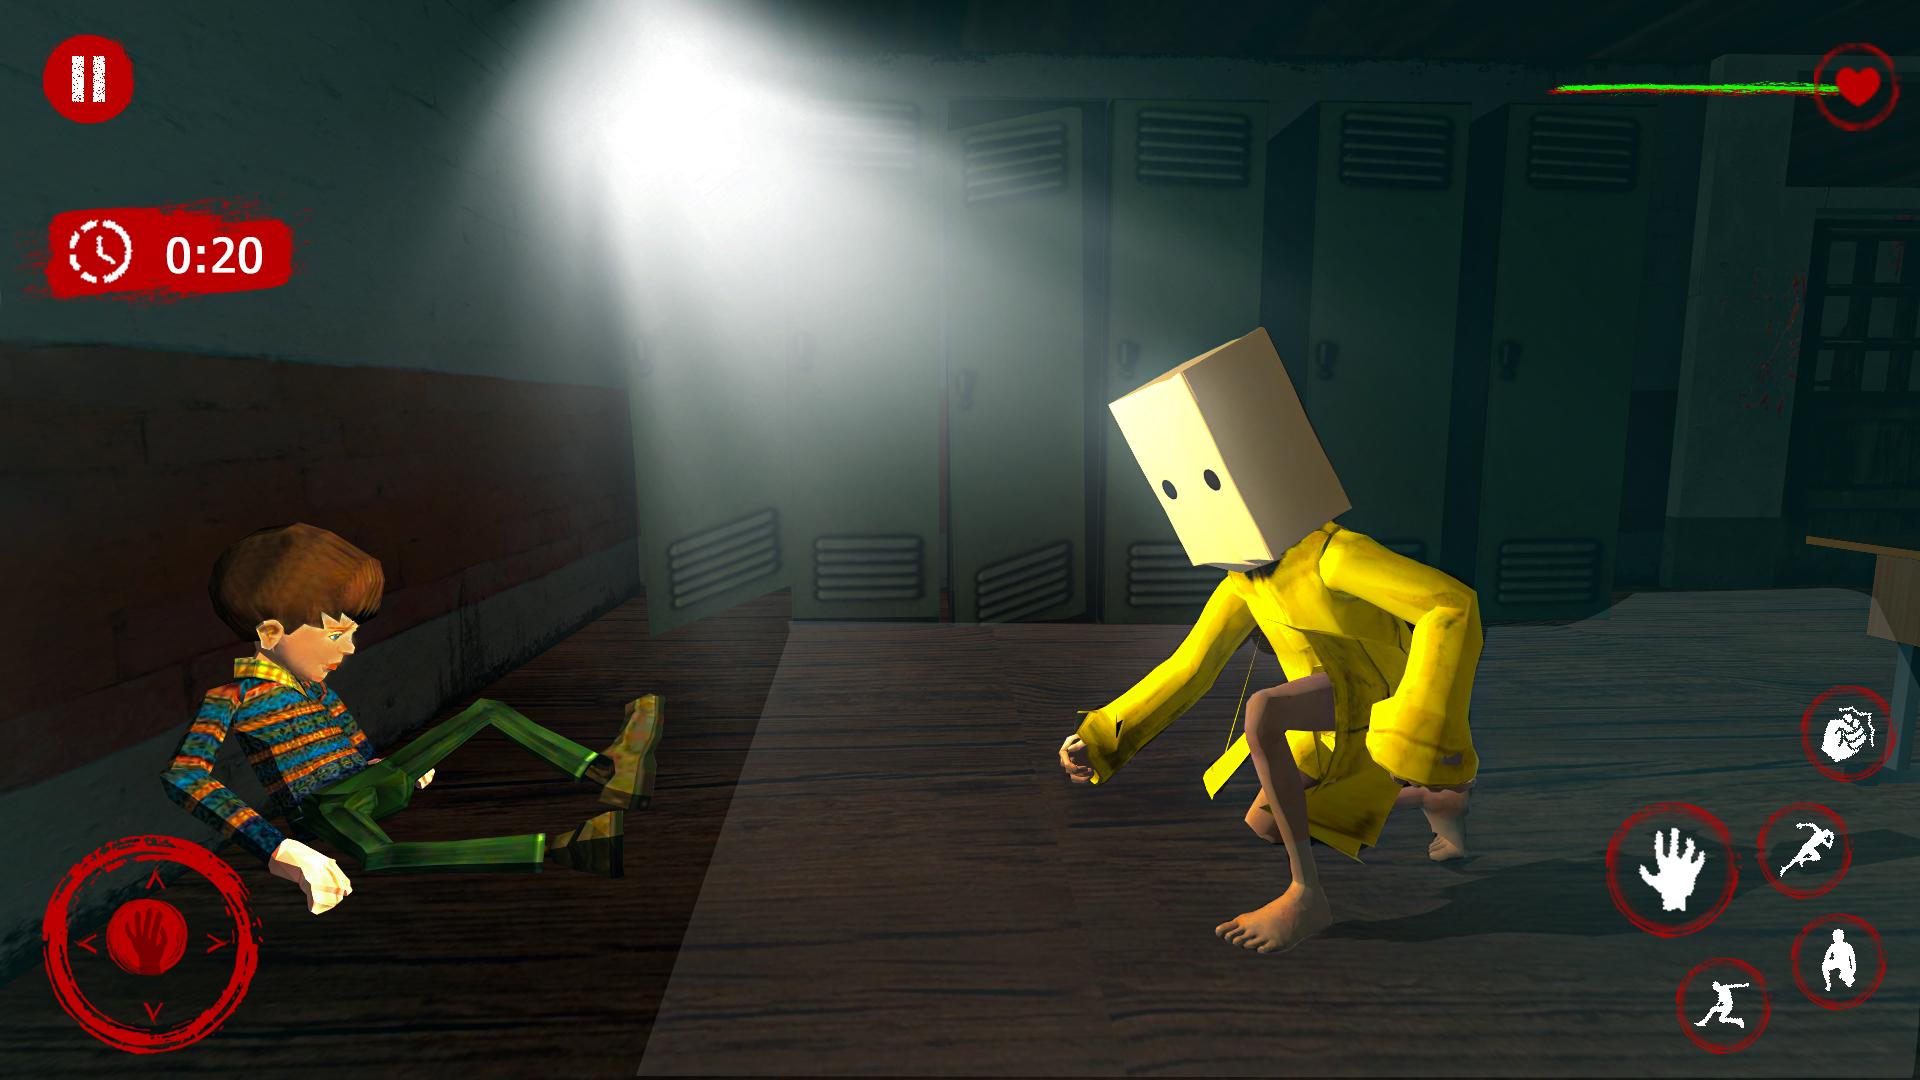 Little Scary Nightmares 2 - Haunted House Escape 0.1 Screenshot 9